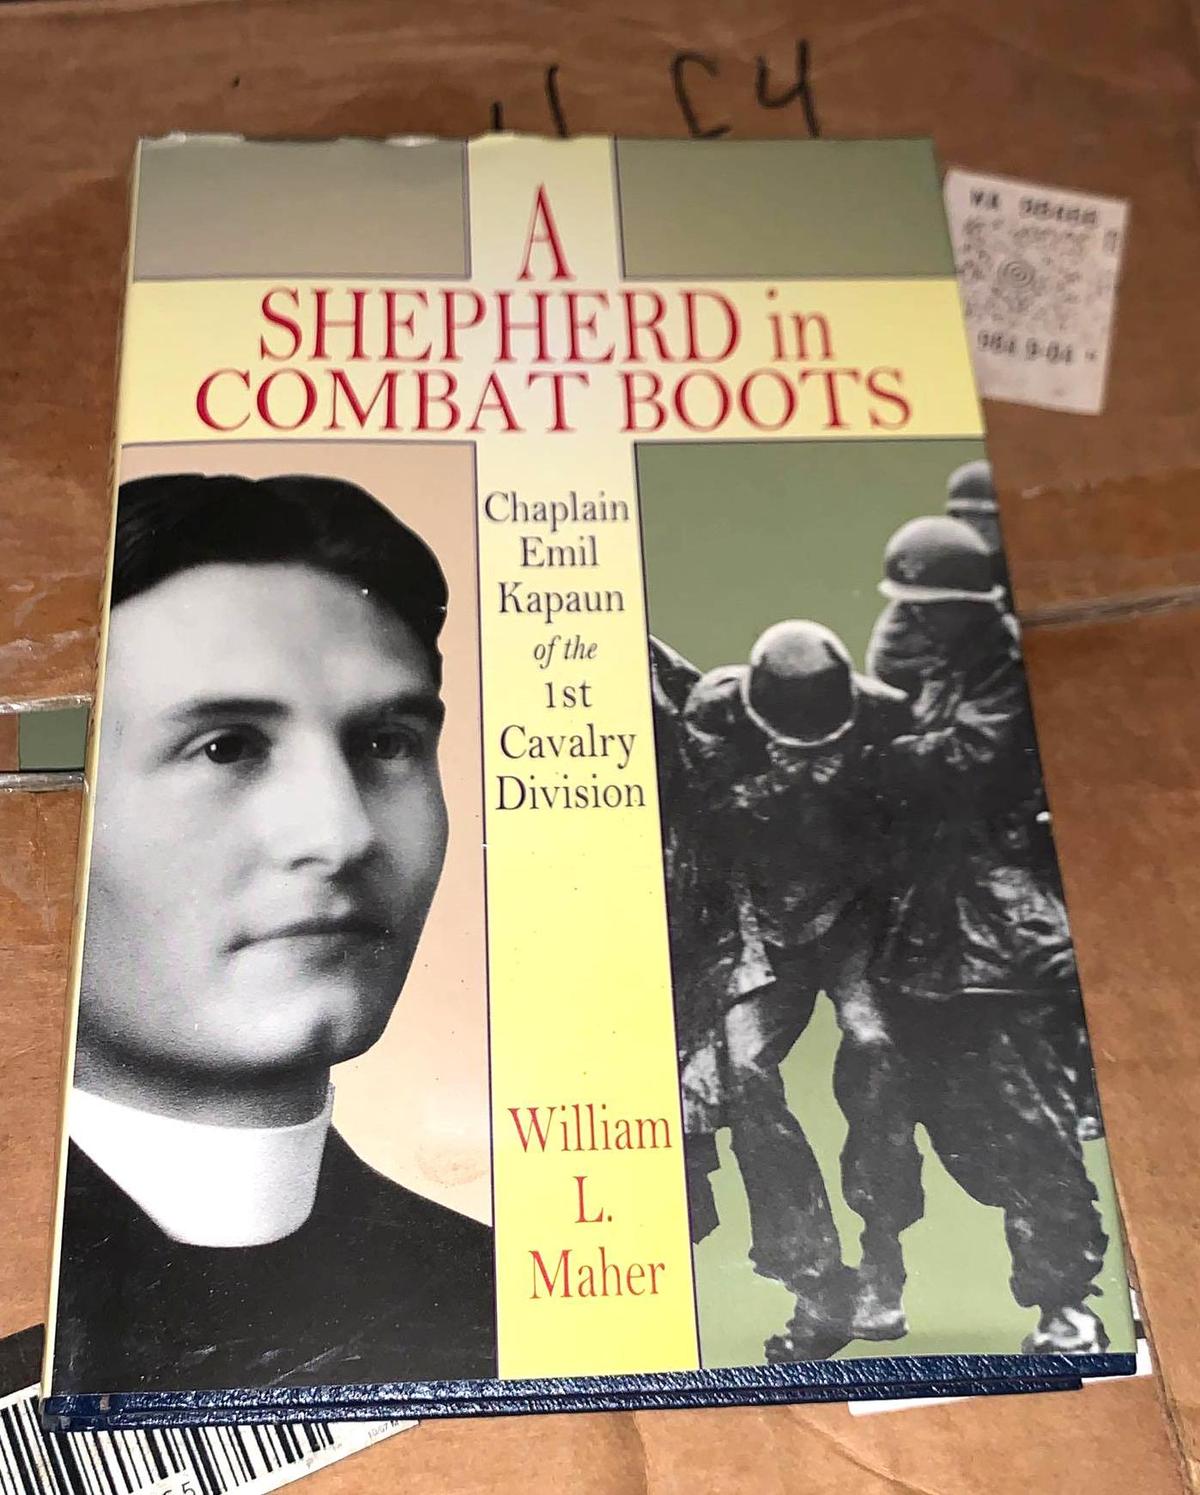 Box full of the Book "A Shepherd in Combat Boots"